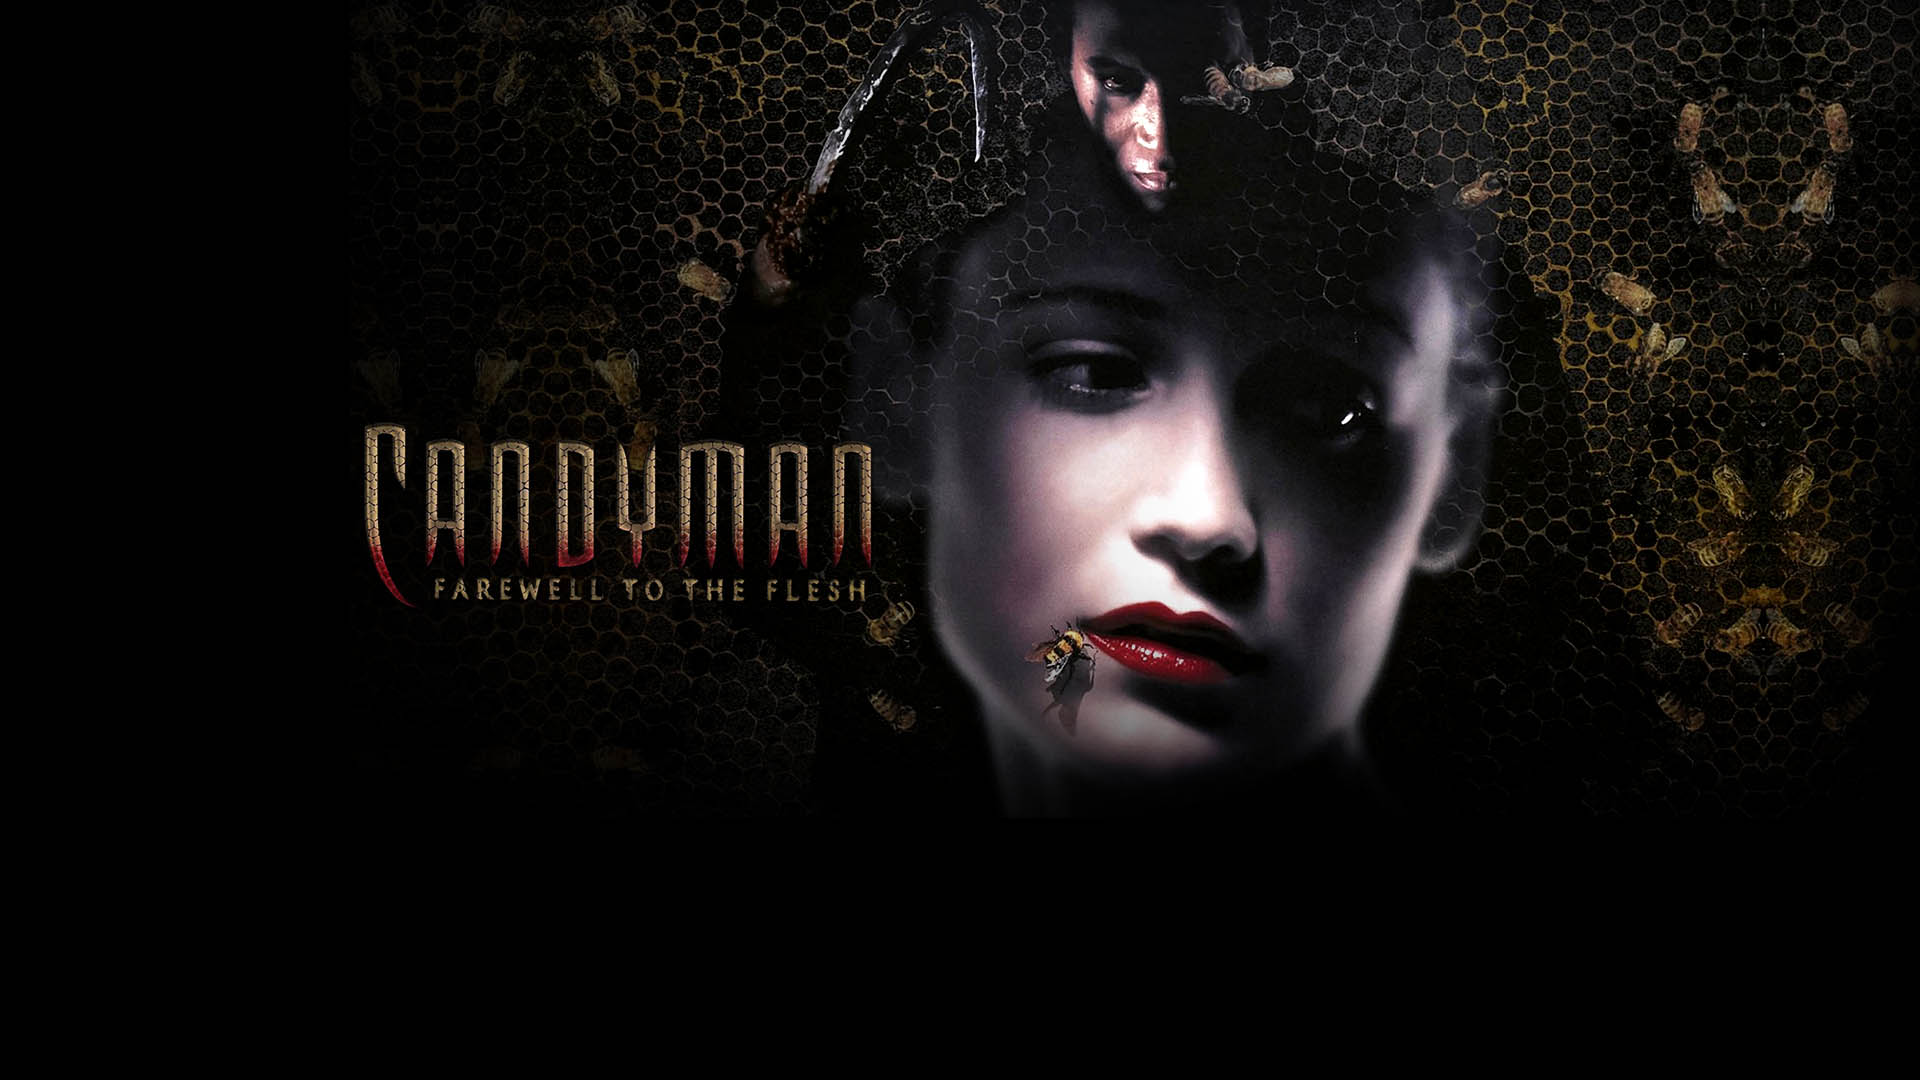 Watch Candyman: Farewell to the Flesh Online | Stream Full Movies